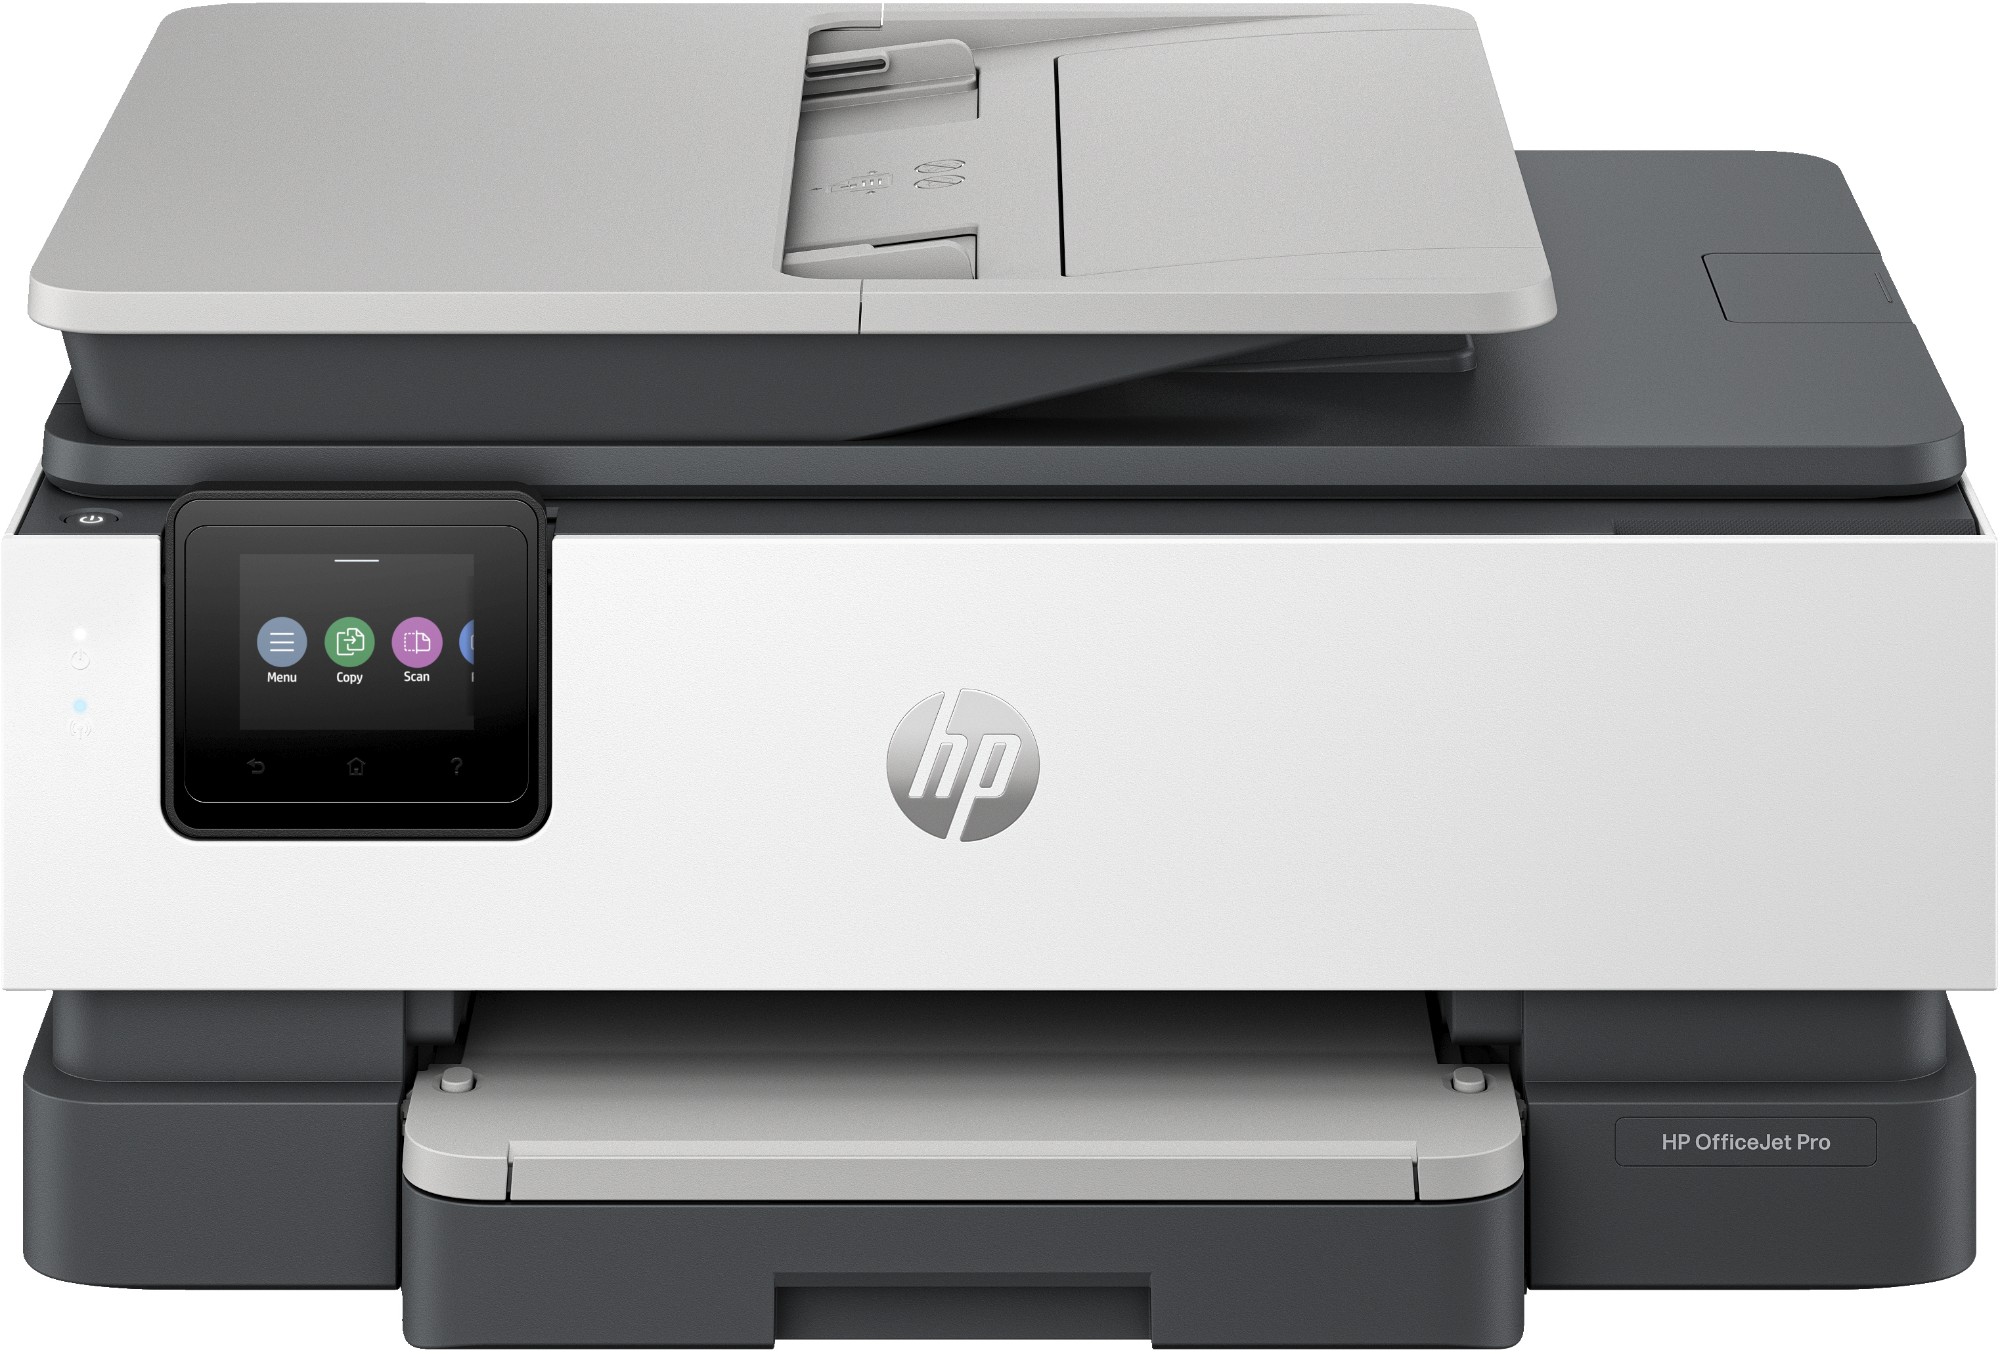 HP OfficeJet Pro HP 8125e All-in-One Printer, Colour, Printer for Home, Print, copy, scan, Automatic document feeder; Touchscreen; Smart Advance Scan; Quiet mode; Print over VPN with HP+